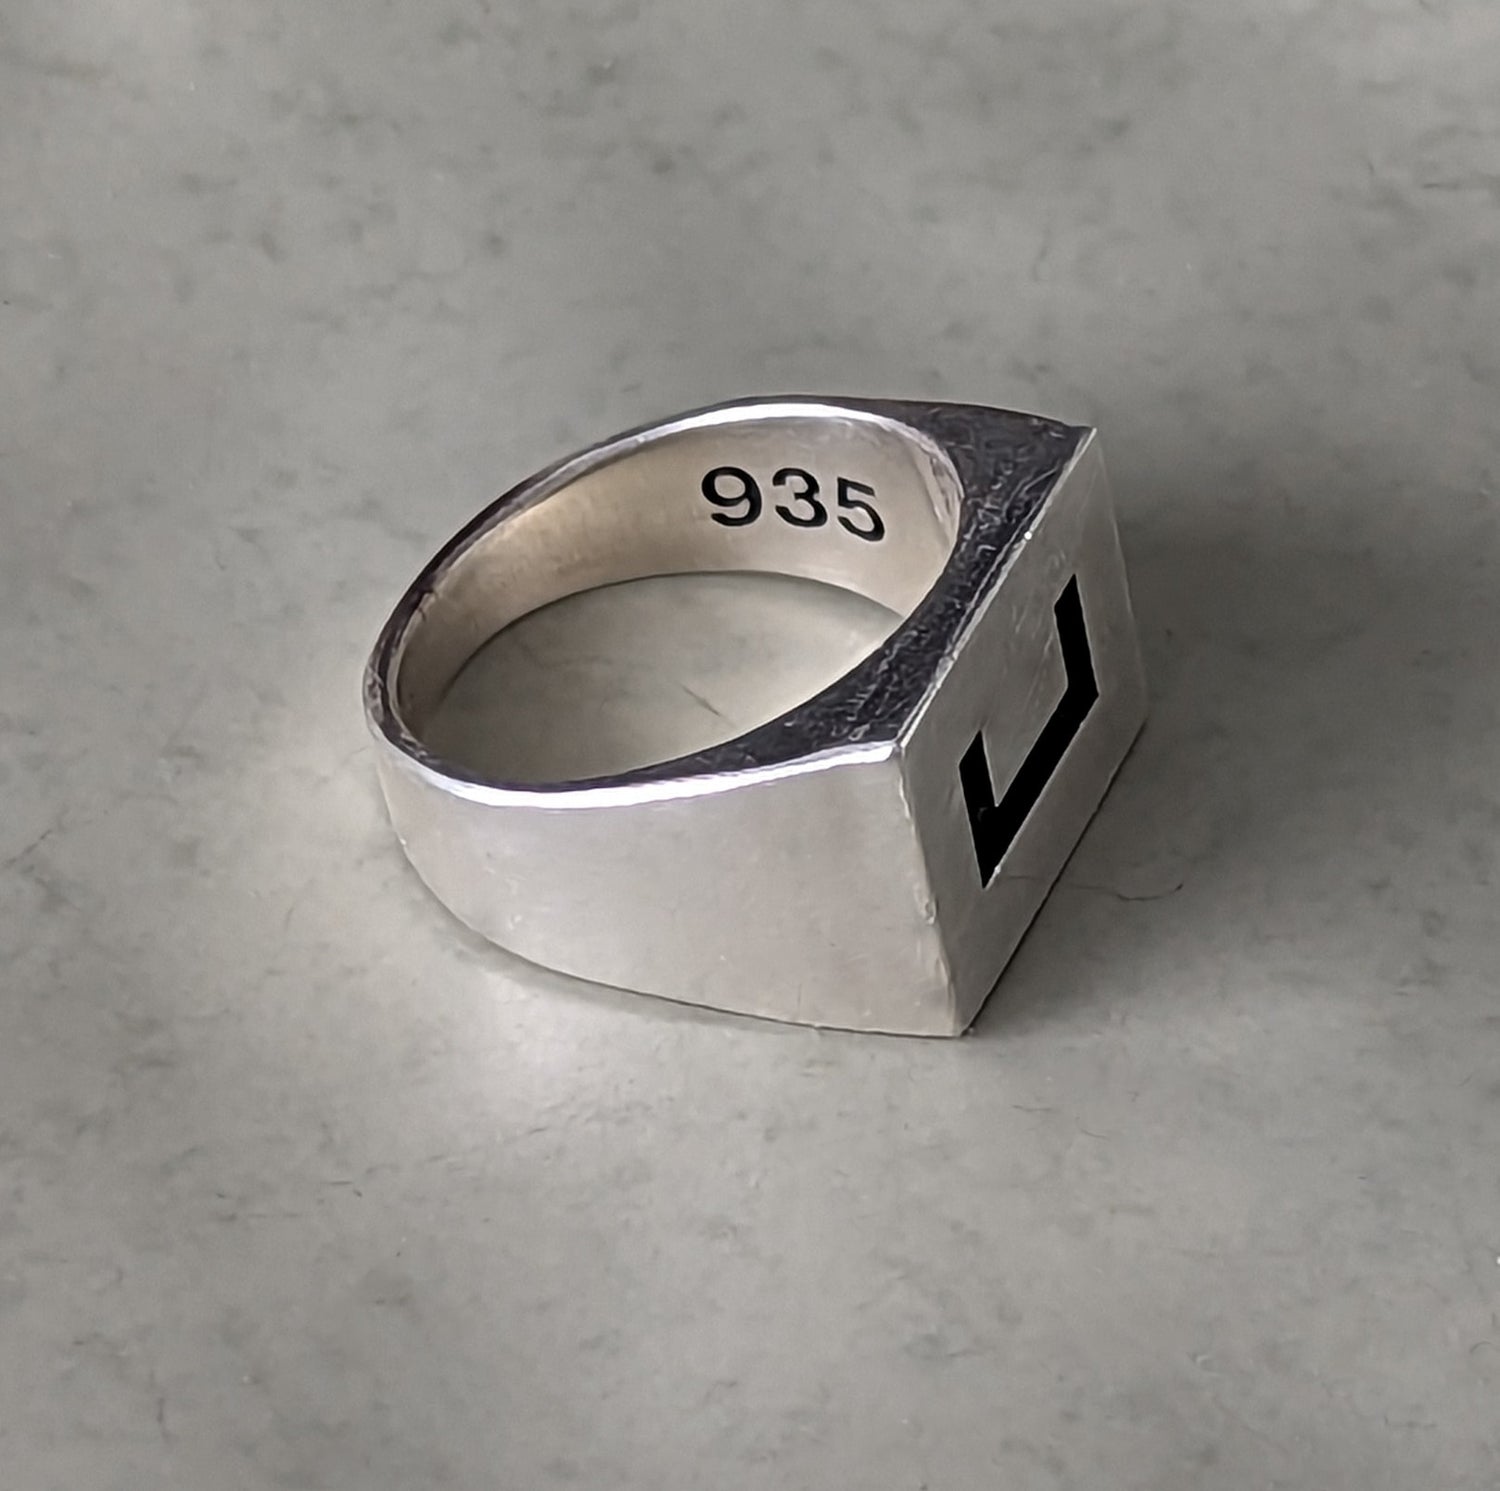 Closeup image of brilliant 935 silver showcasing 935 engraved and oxidized for contrast, alongside the front face of the rectangle knuckle with a bold single square bracket in the middle also engraved and oxidized.